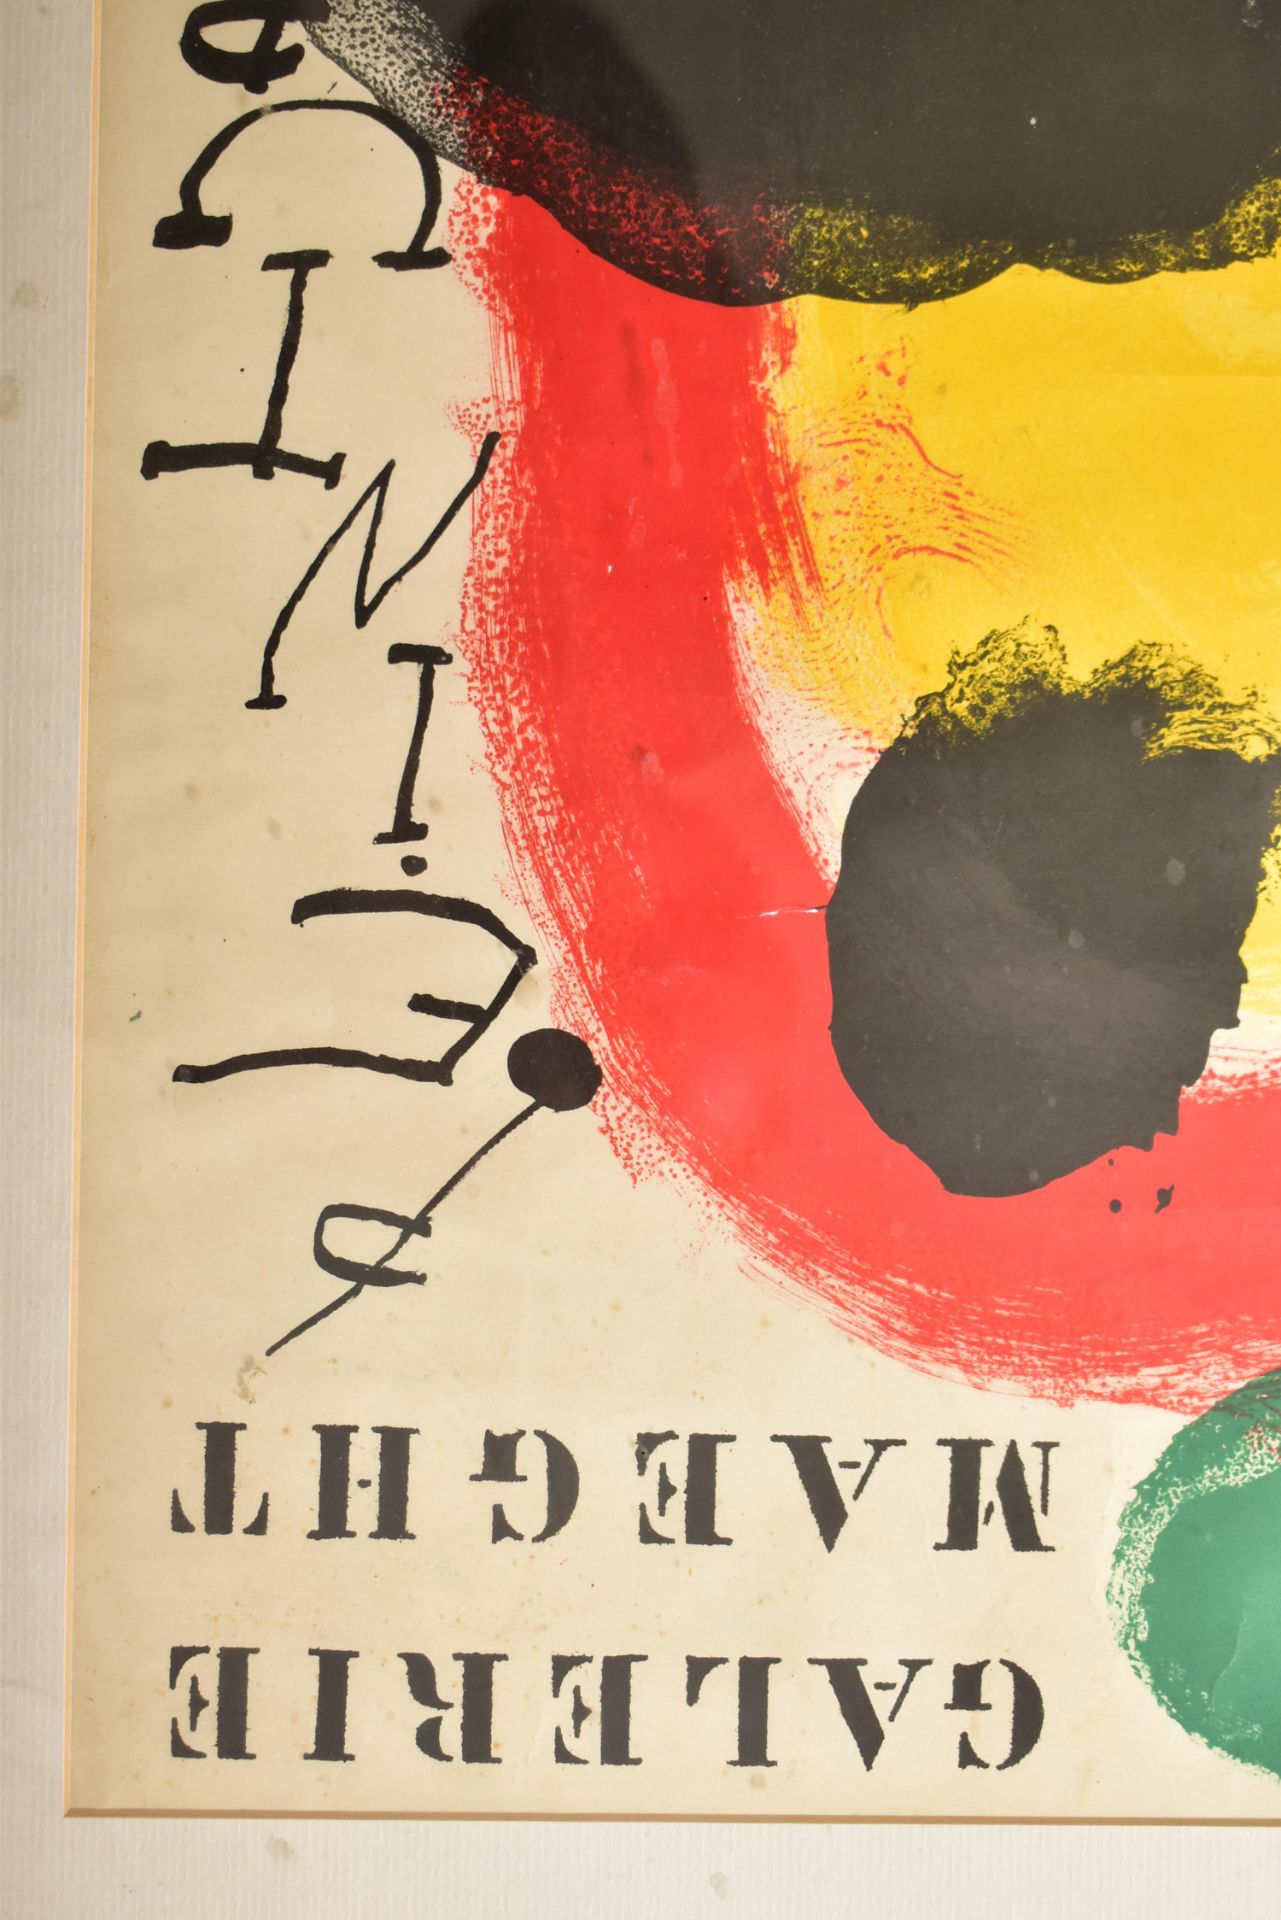 JOAN MIRO / GALERIE MAEGHT - 20TH CENTURY EXHIBITION POSTER - Image 3 of 5